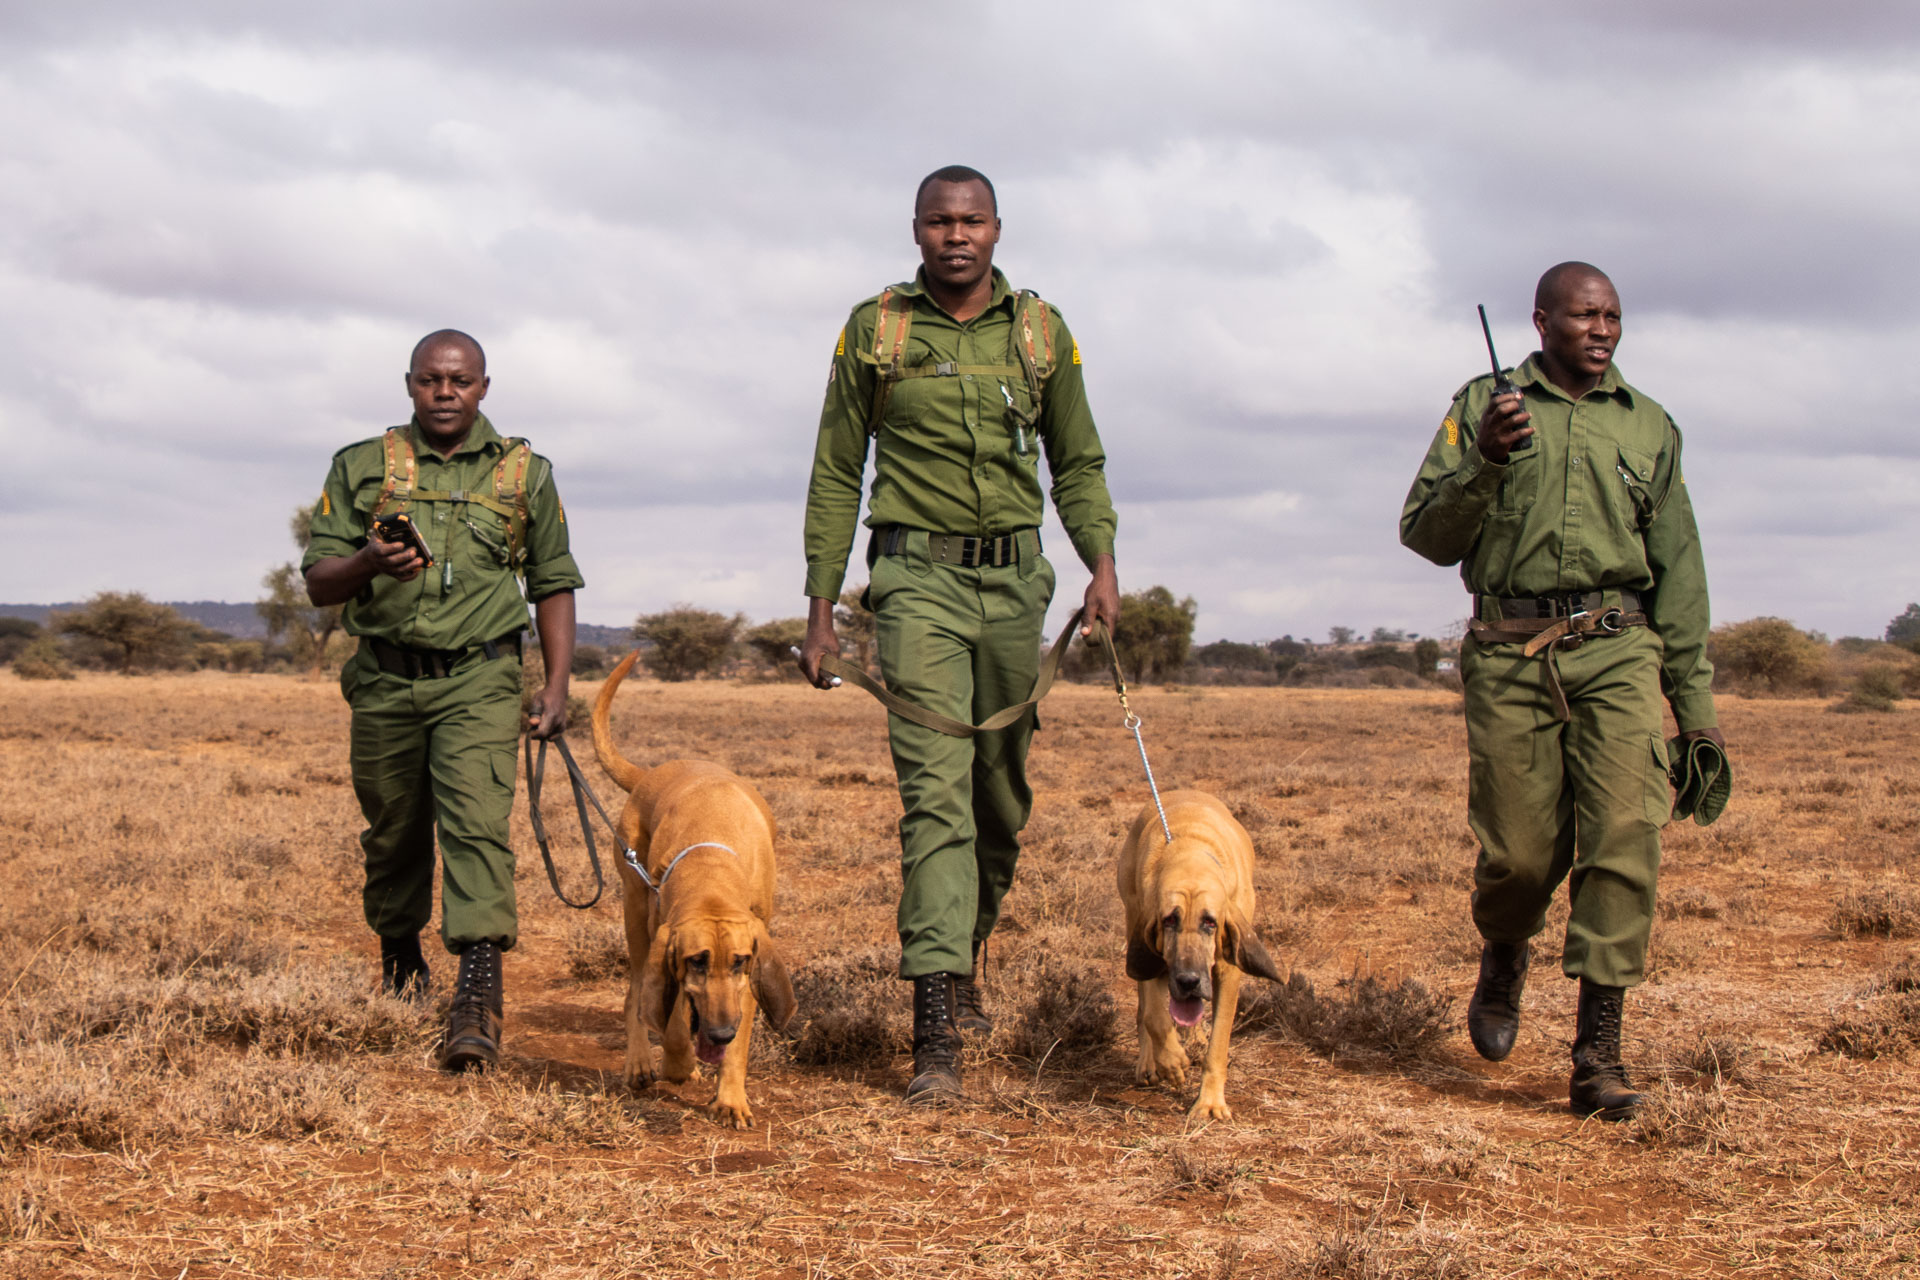 Anti-poaching canine units are most active in high-risk areas